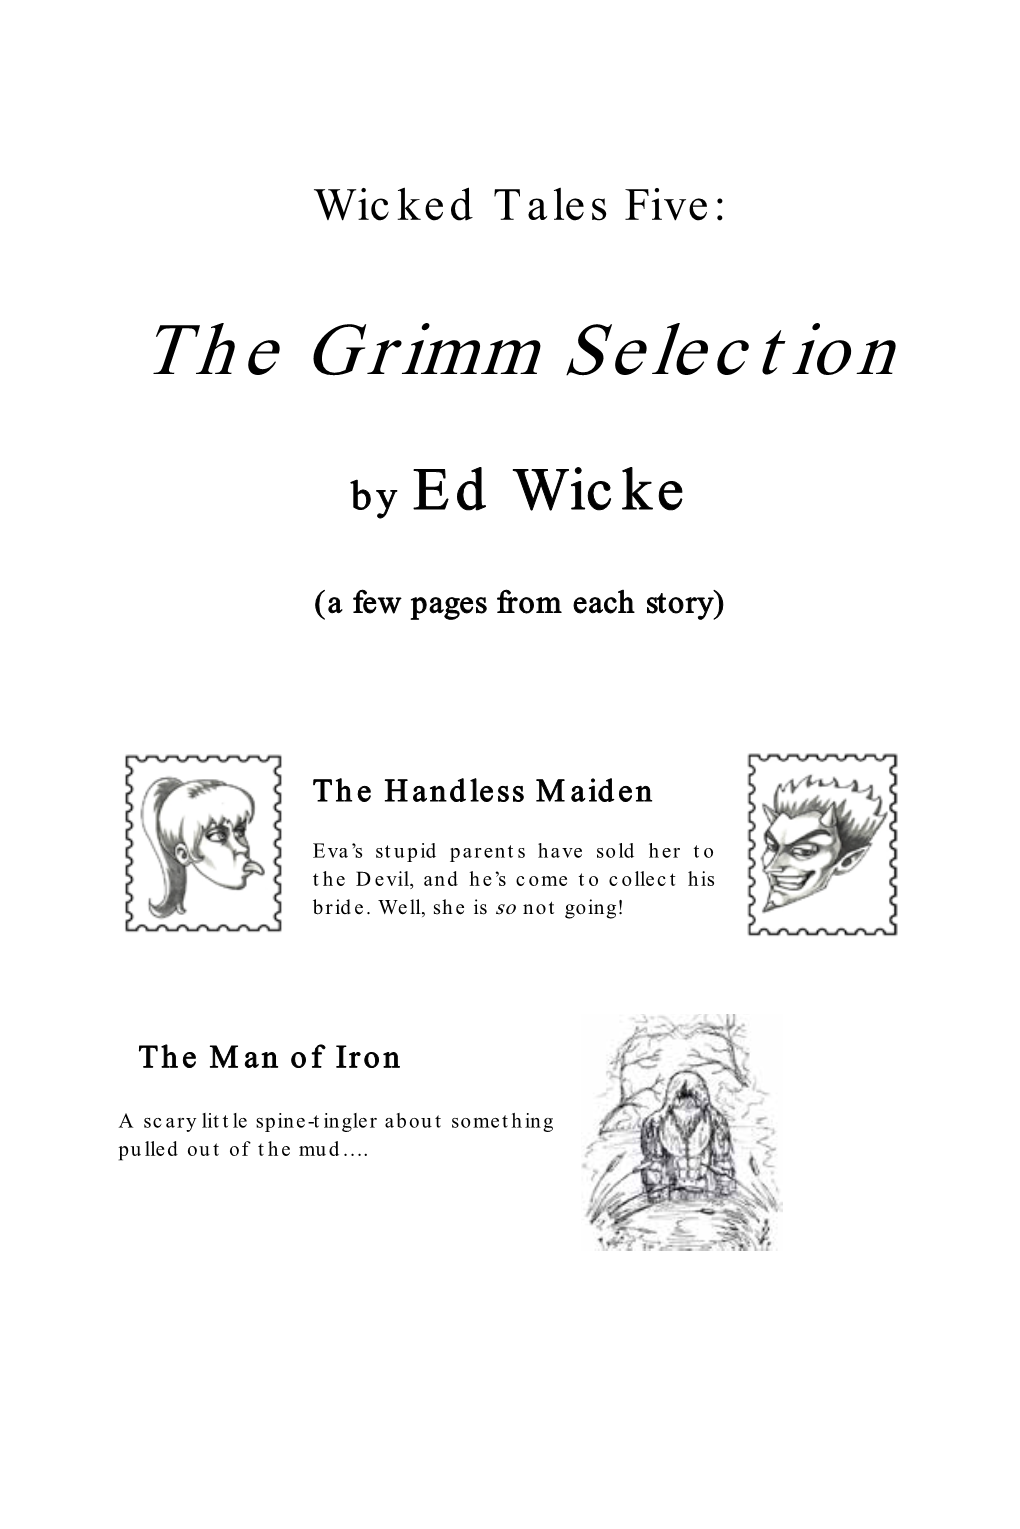 The Grimm Selection